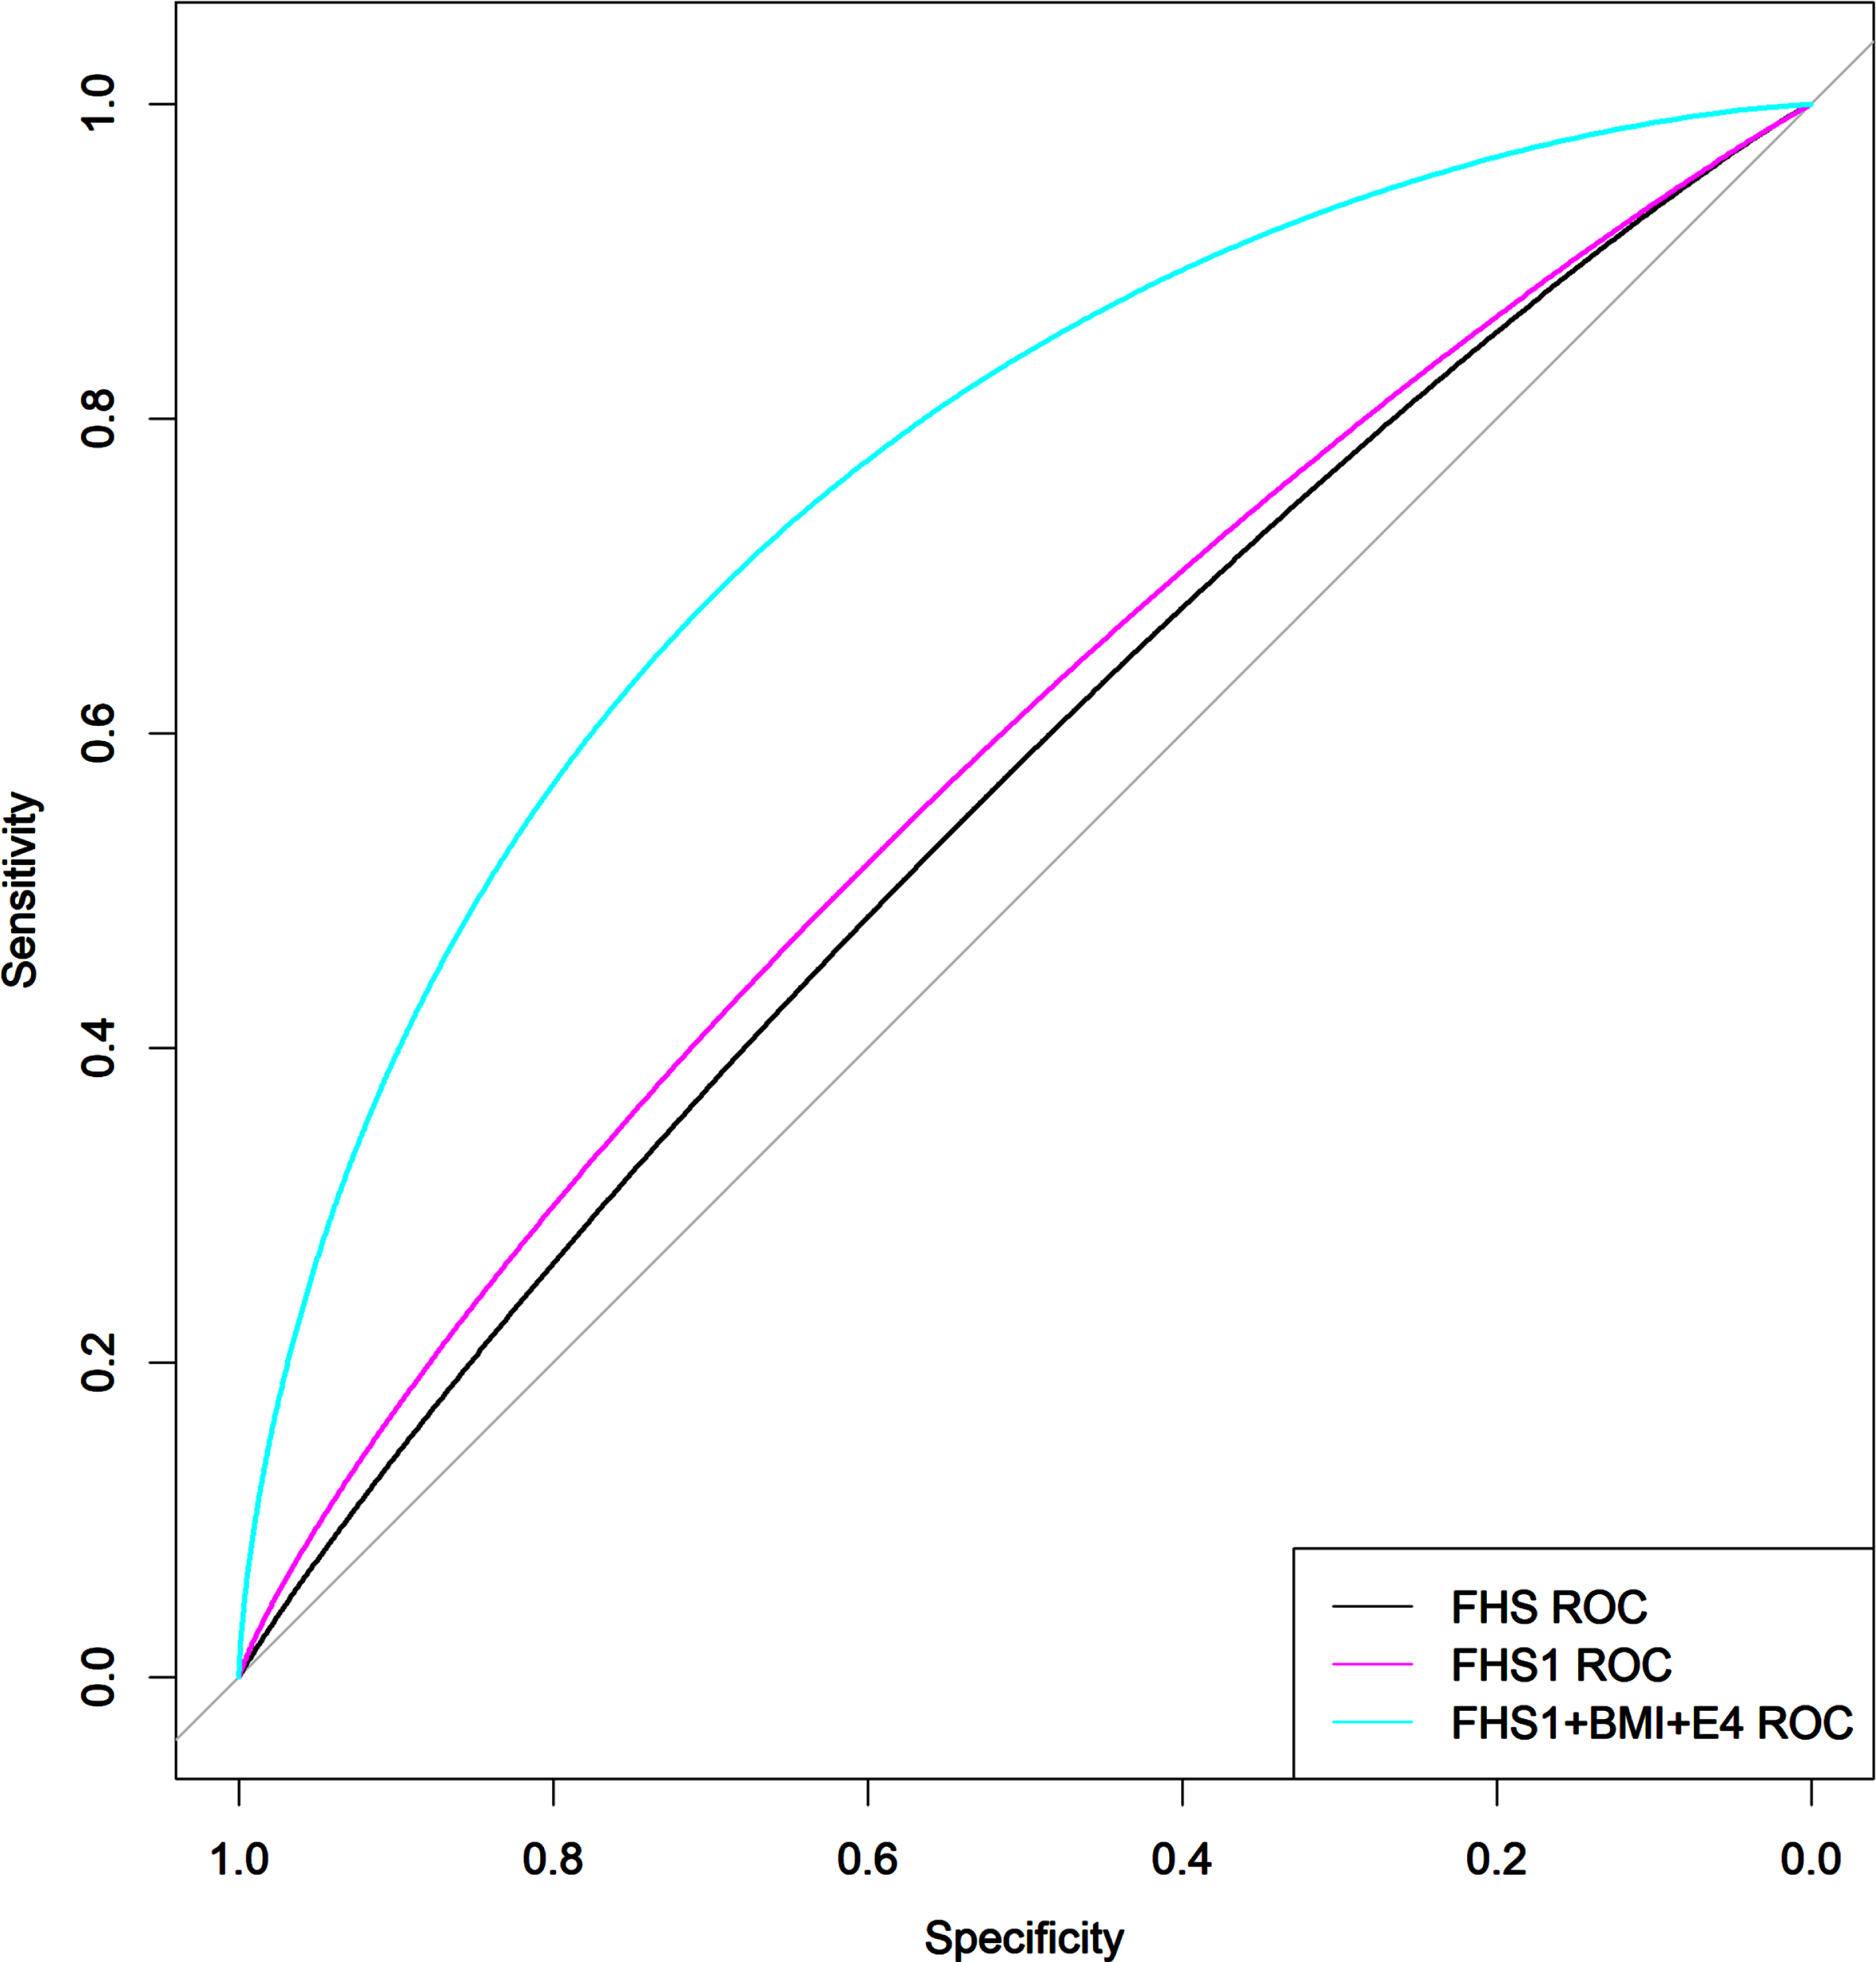 Receiver Operating Characteristic curves for predicting AT classification positive. FHS score, Framingham risk score; FHS1 score, Framingham risk score did not include body mass index; BMI, body mass index. The performance of the combination model FHS1 + BMI+ɛ4 in predicting AT classification positive was better than (p < 0.001) the models that used only FHS score or FHS1 score.